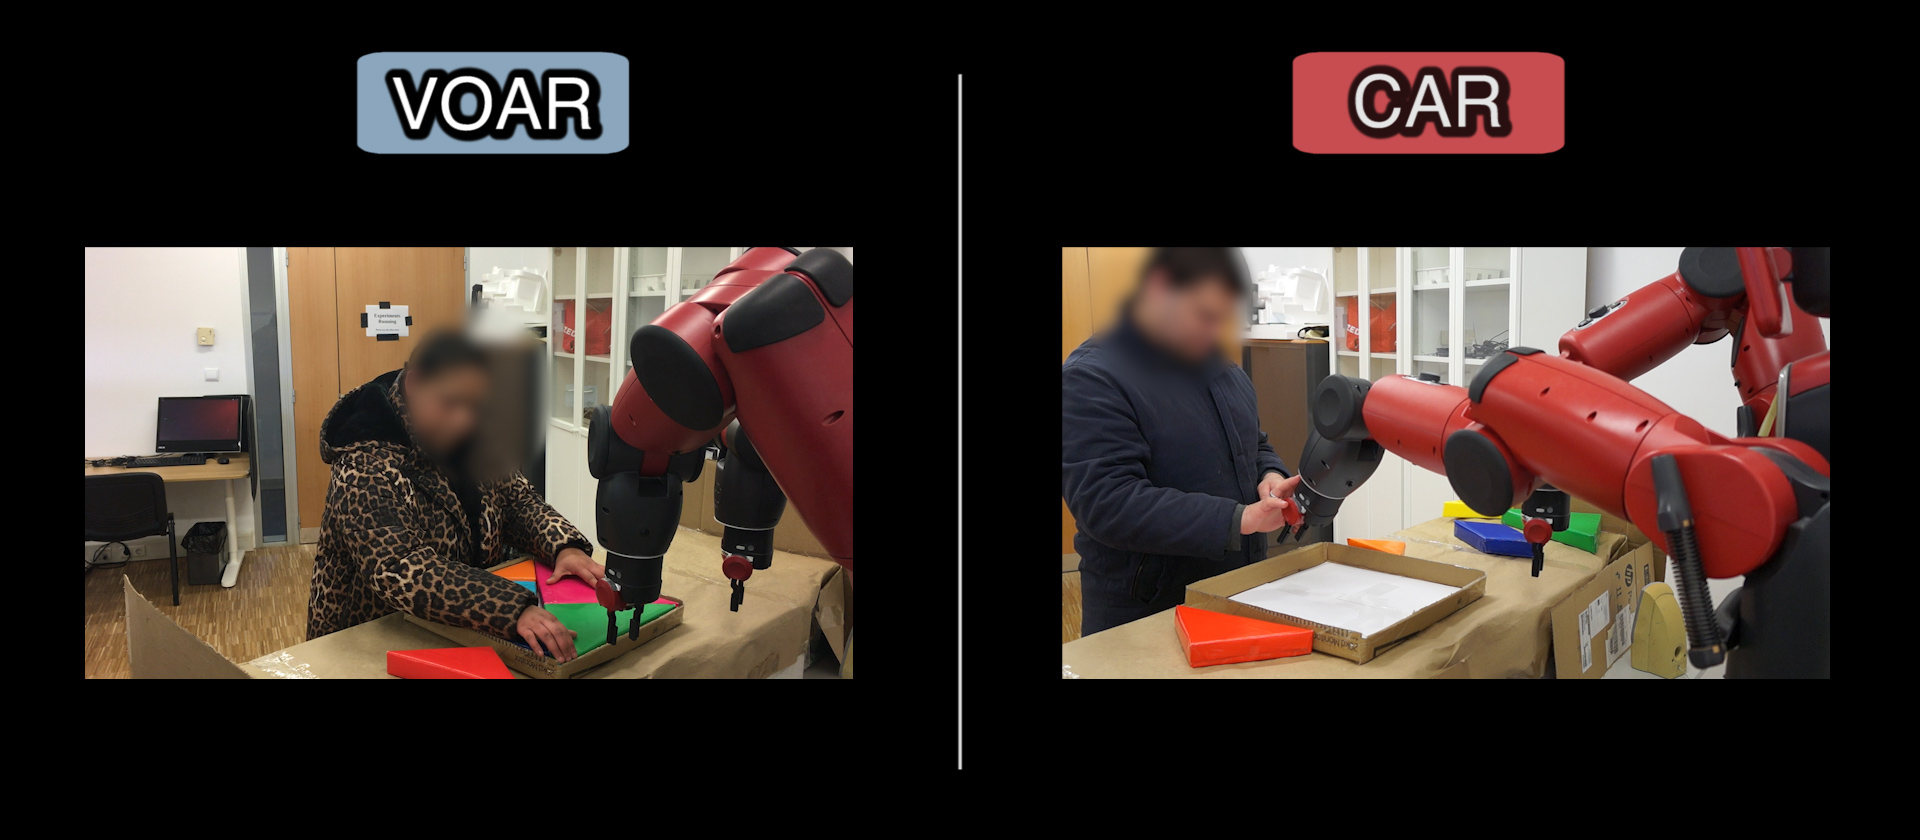 Two blind people doing a tagram puzzle with the help of a robot. One the robot is helping the user with its arms (Condition CAR); in the other the robot is still just providing audio instructions (Condition VOAR). 